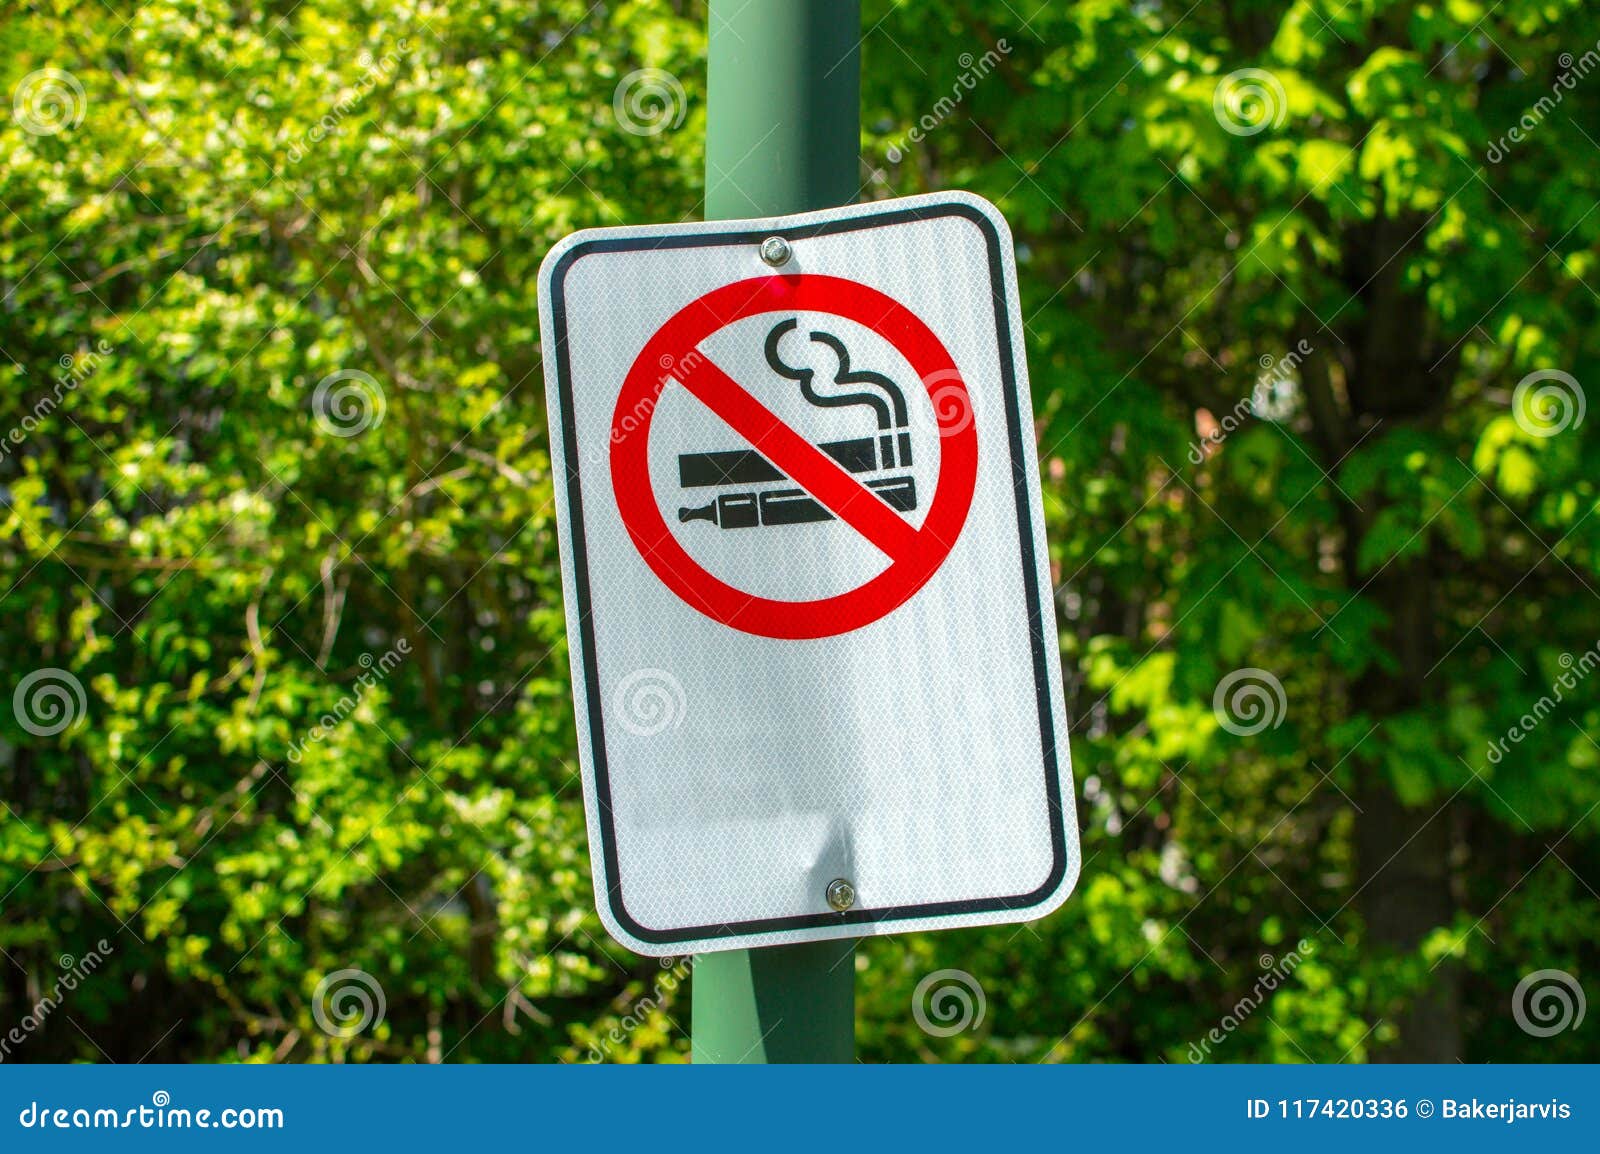 no smoking and vaping sign in the public park